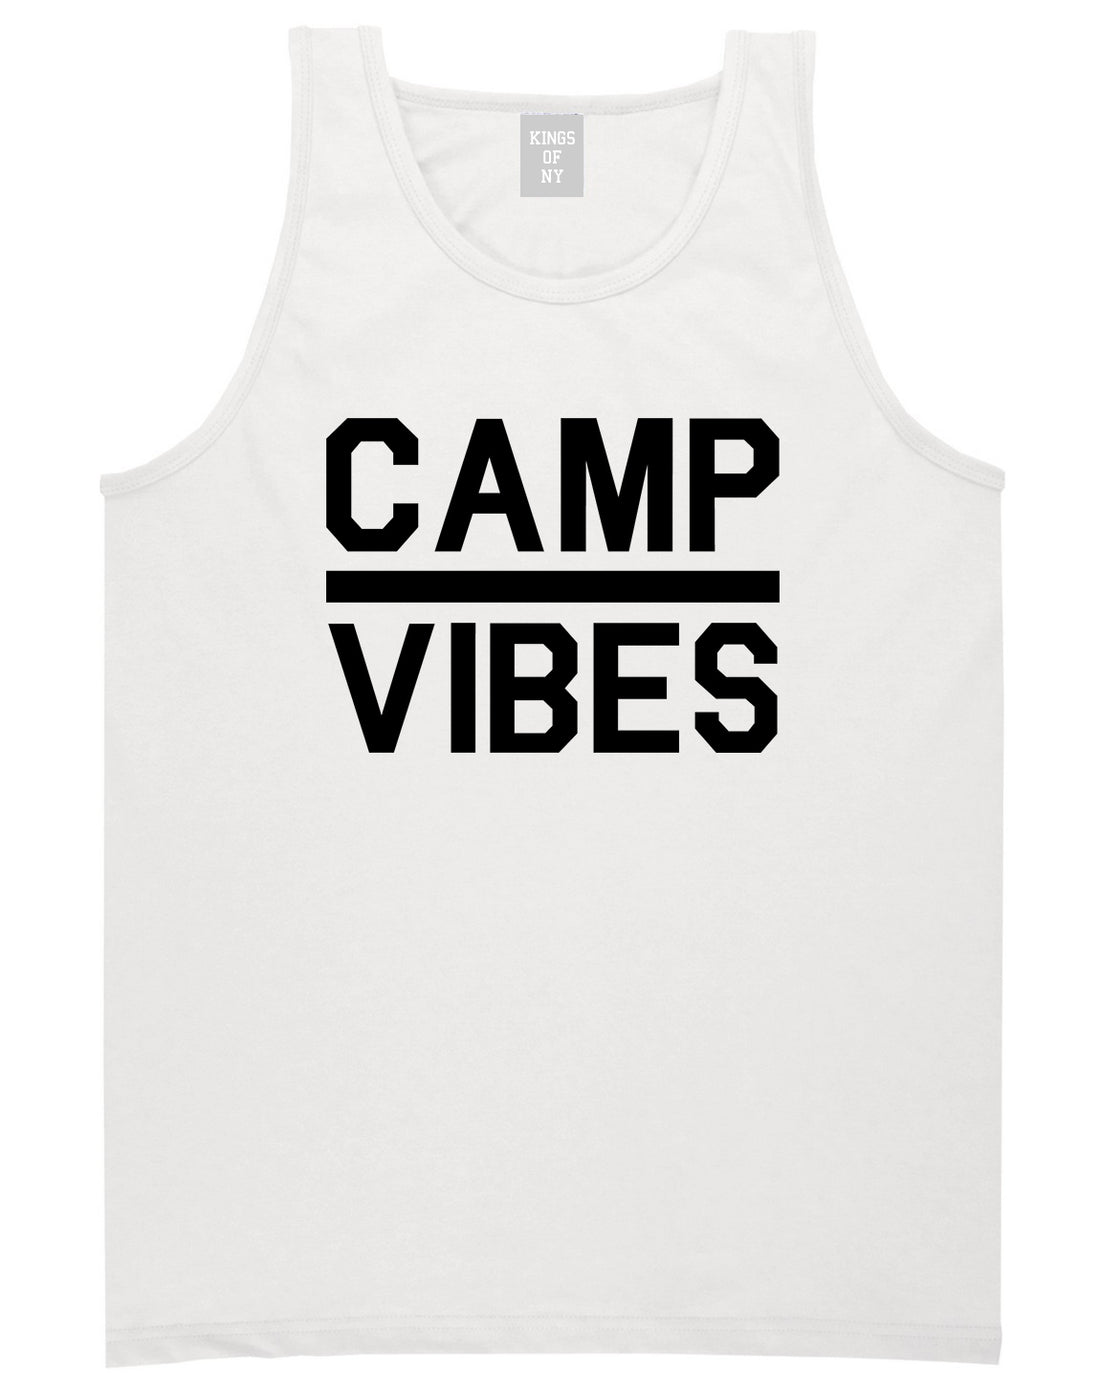 Camp Vibes White Tank Top Shirt by Kings Of NY